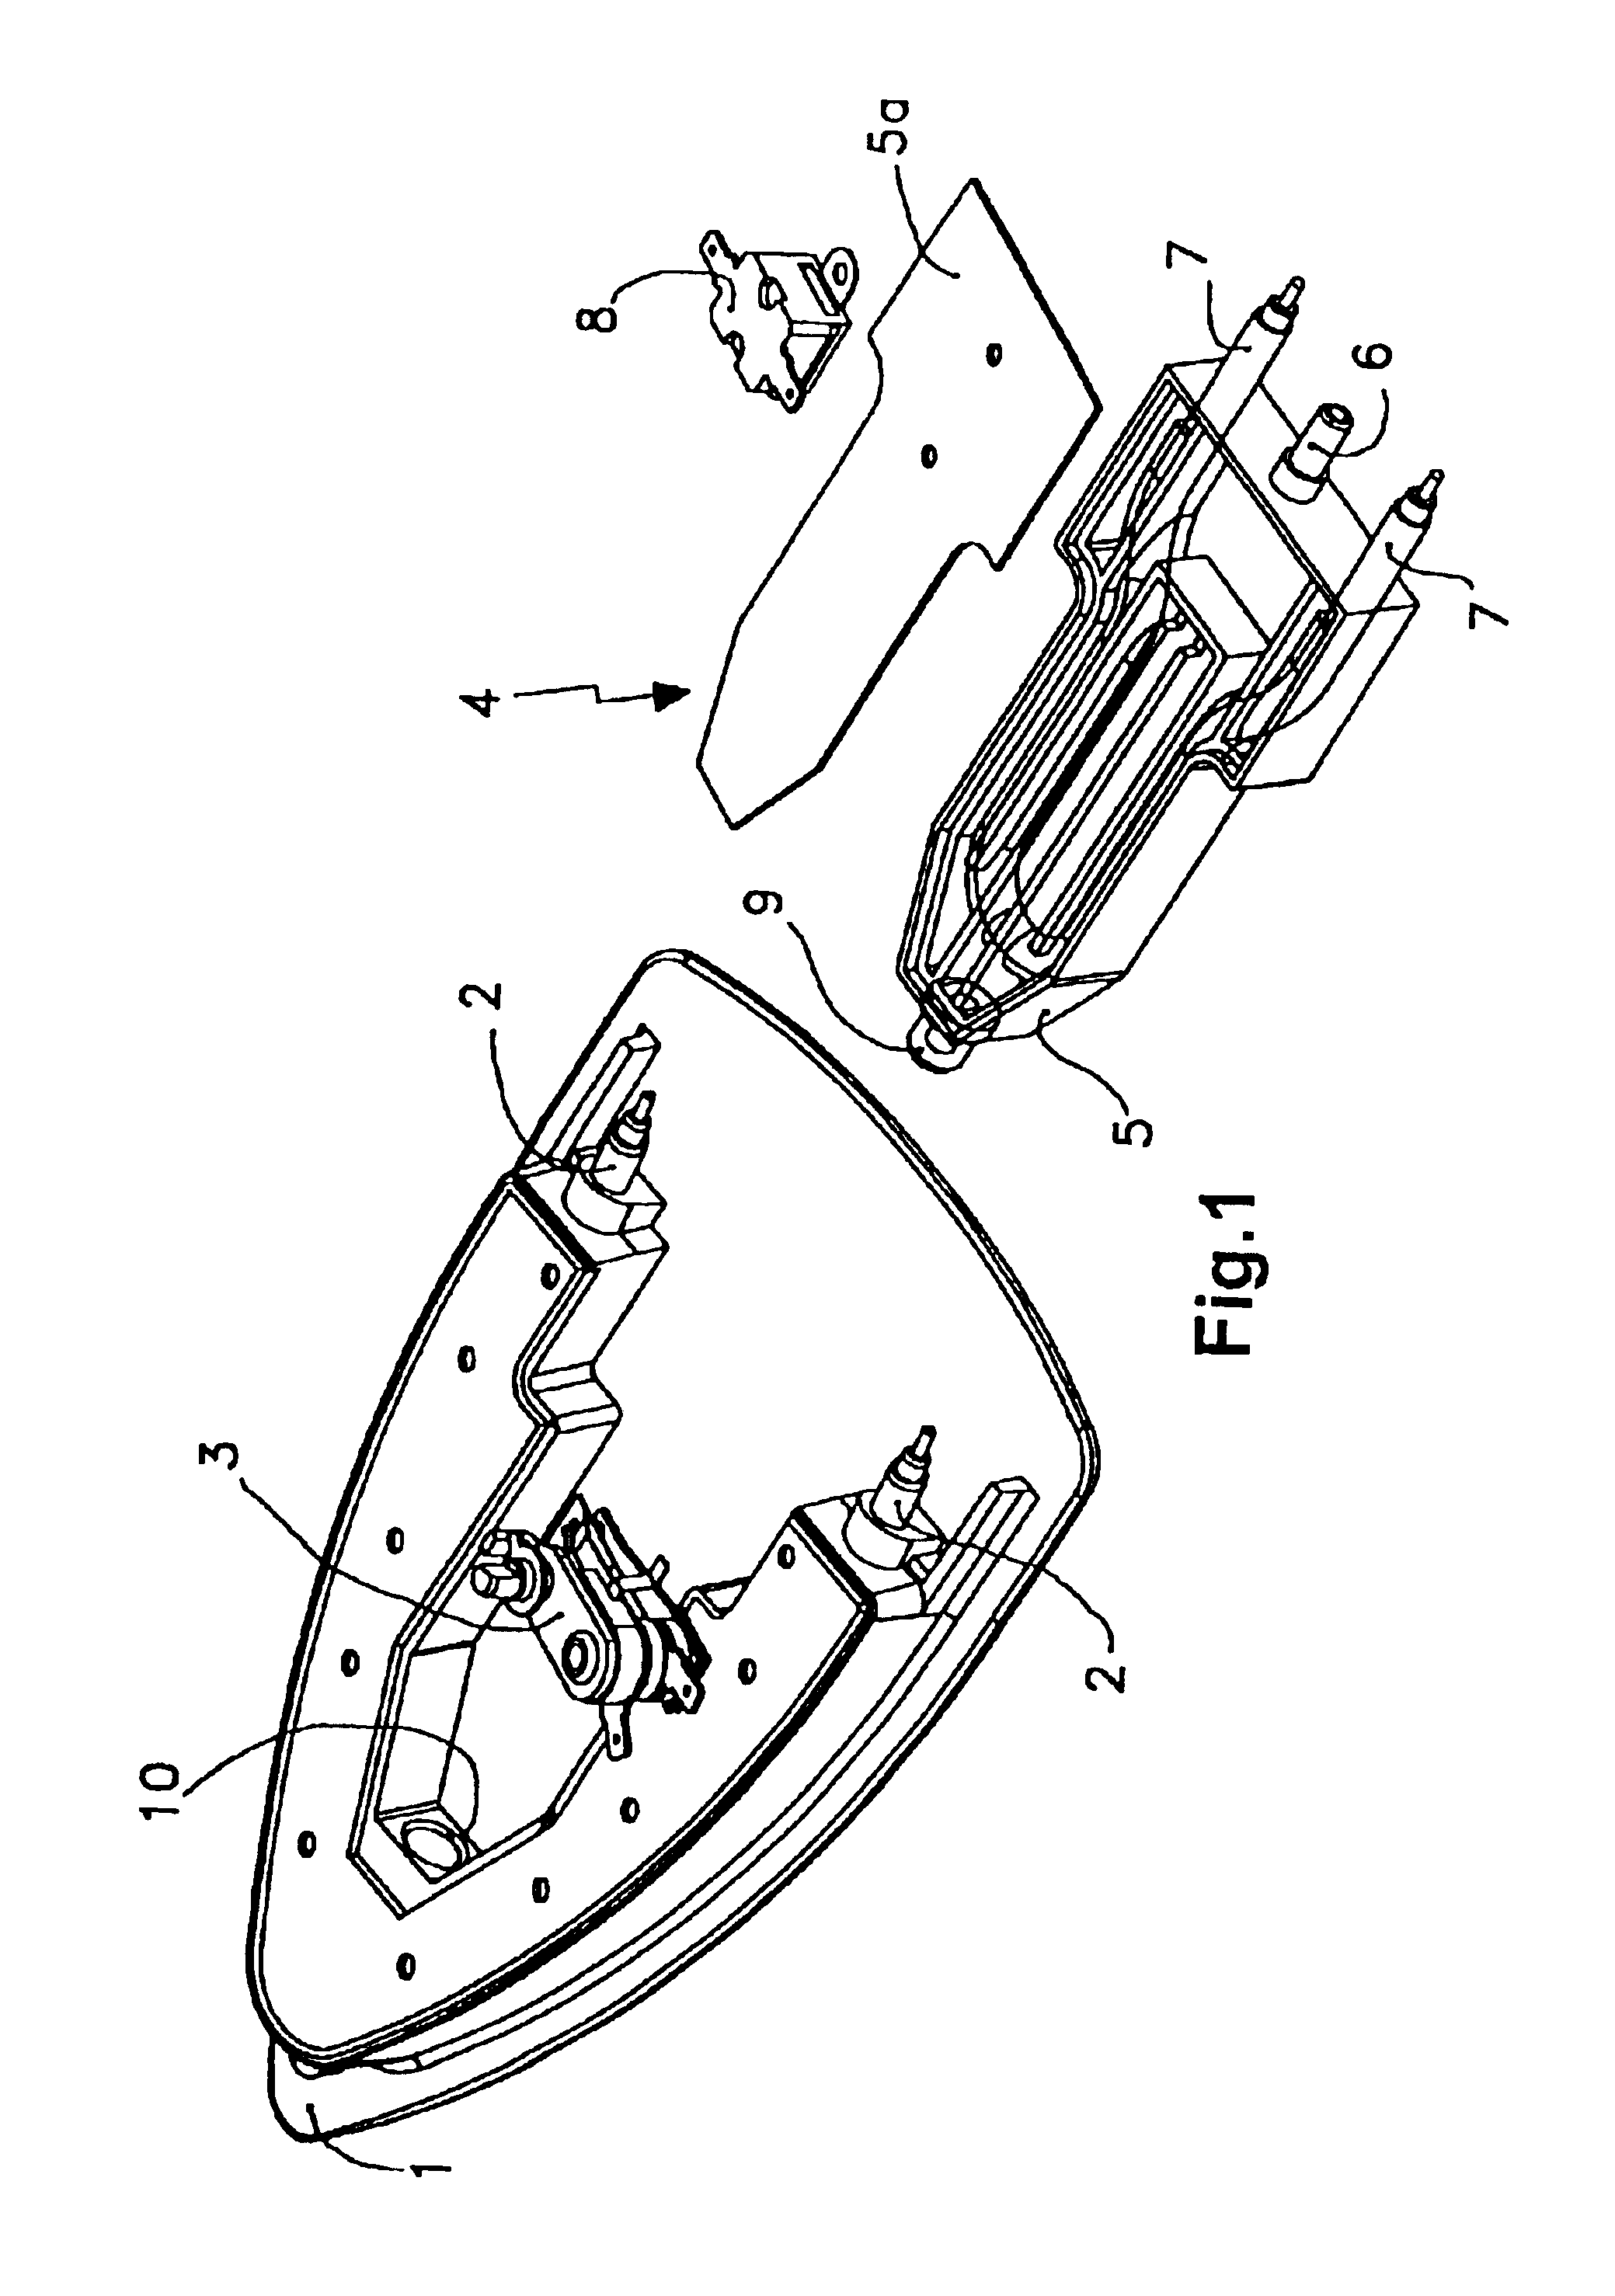 Domestic steam iron with autonomous steam assembly heated by separate heating element